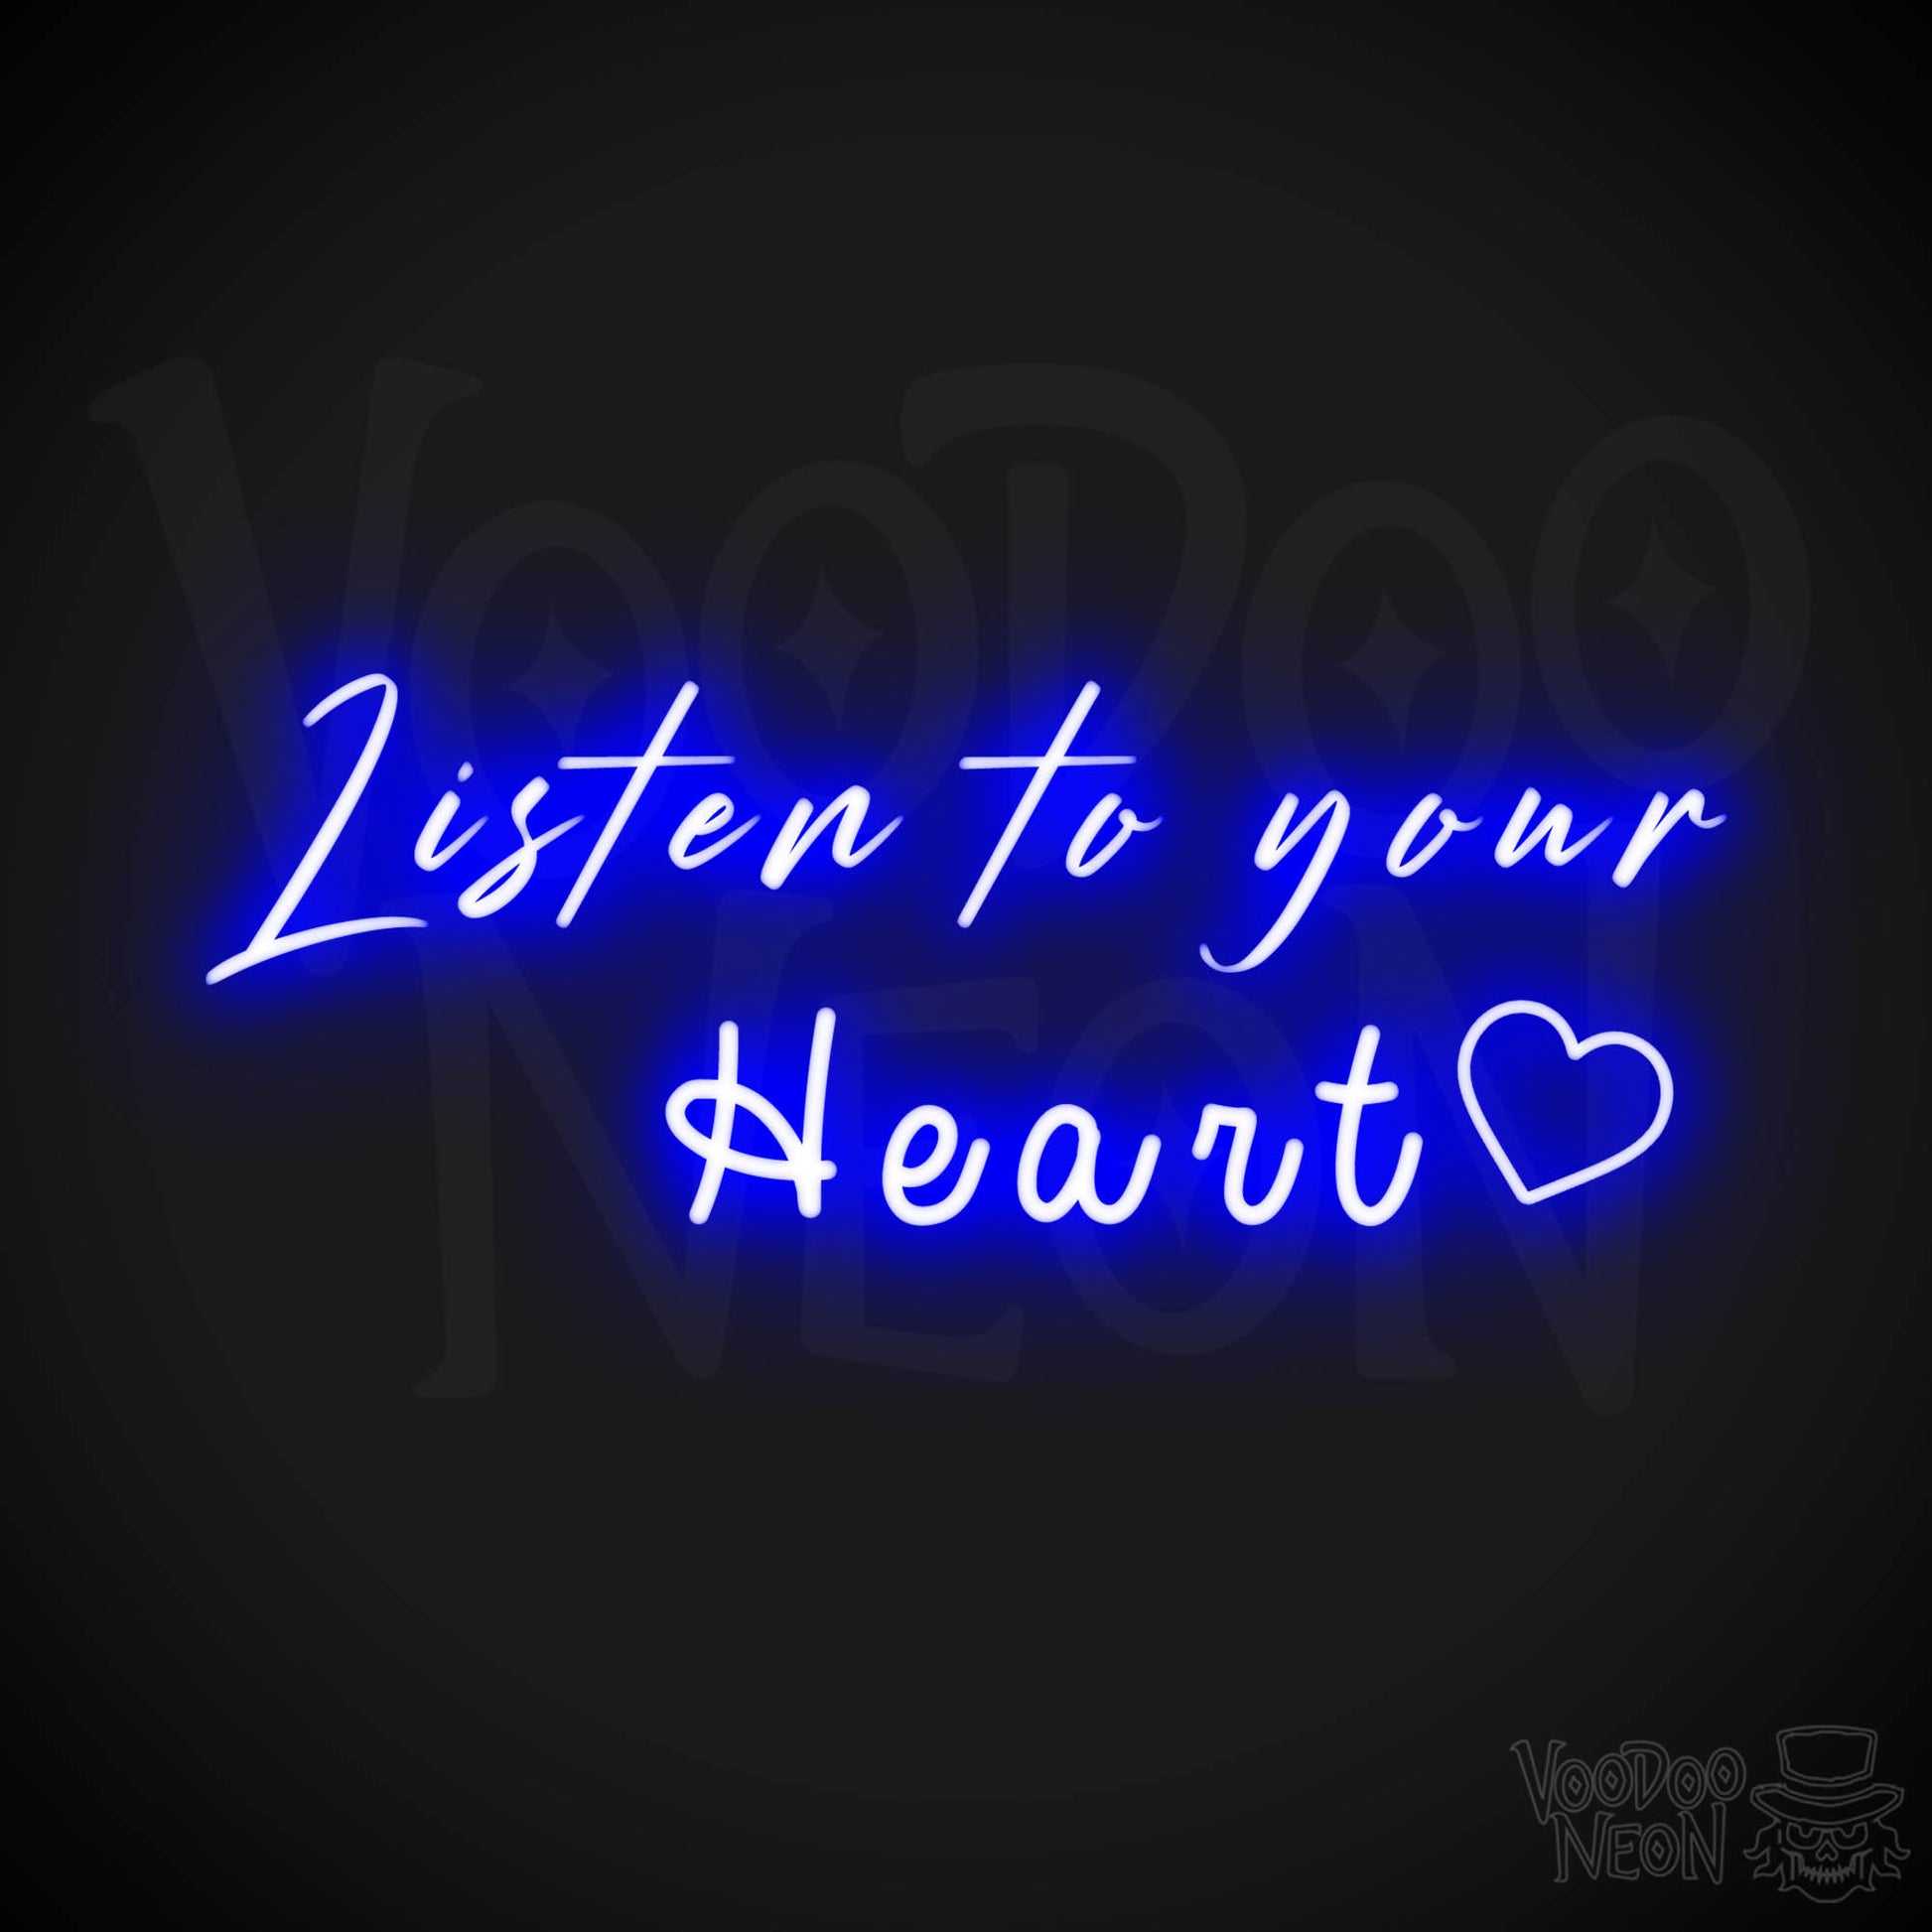 Listen To Your Heart Neon Sign - Neon Listen To Your Heart Sign - Wedding Sign - Color Dark Blue